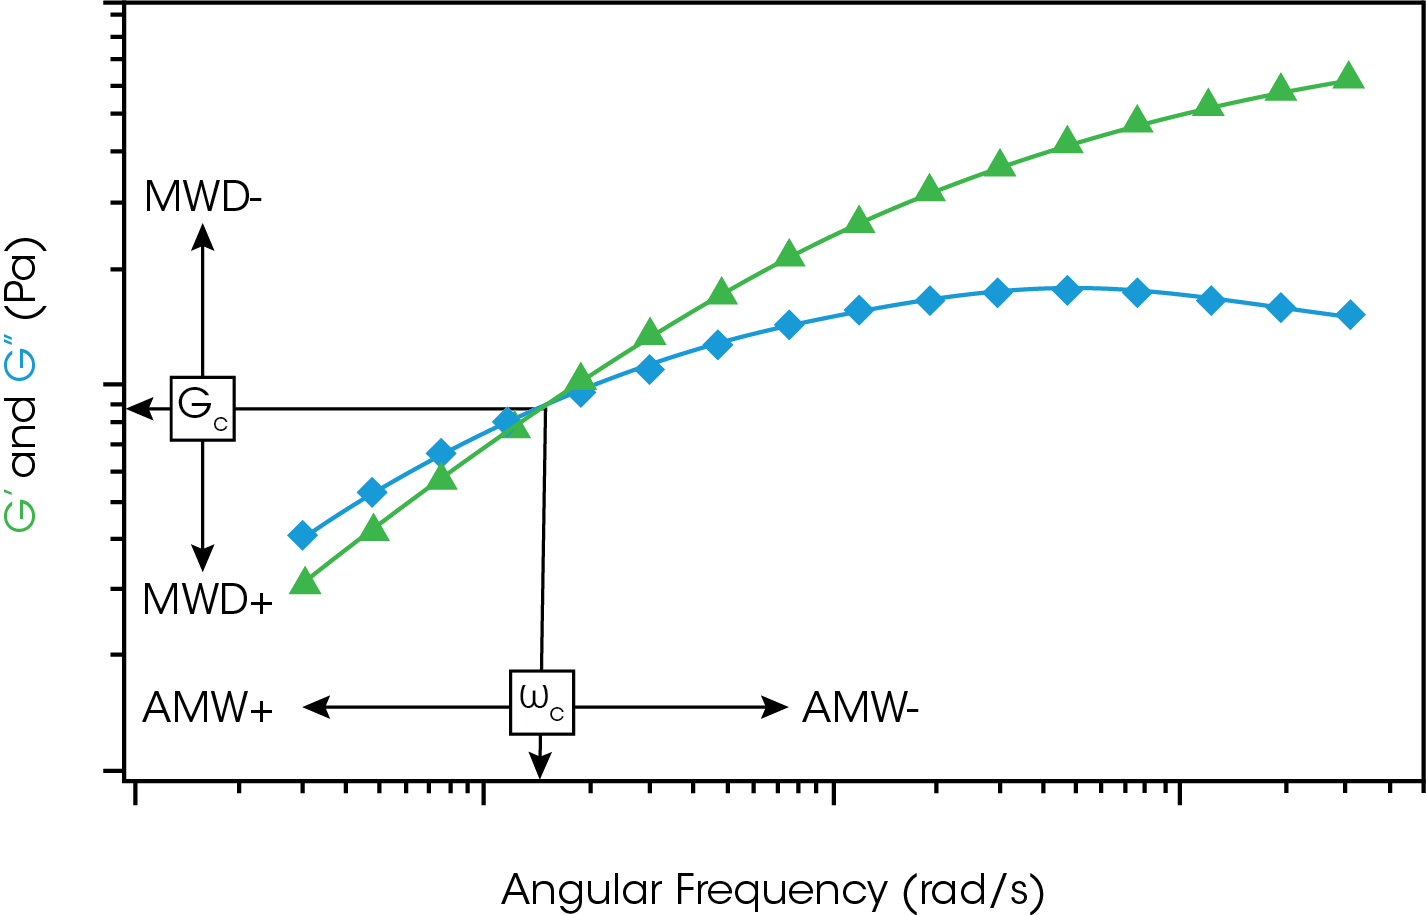 Figure 4. General representation of frequency sweep data depicting the elastic modulus, G’ (green) and viscous modulus, G” (blue) for a molten polymer.